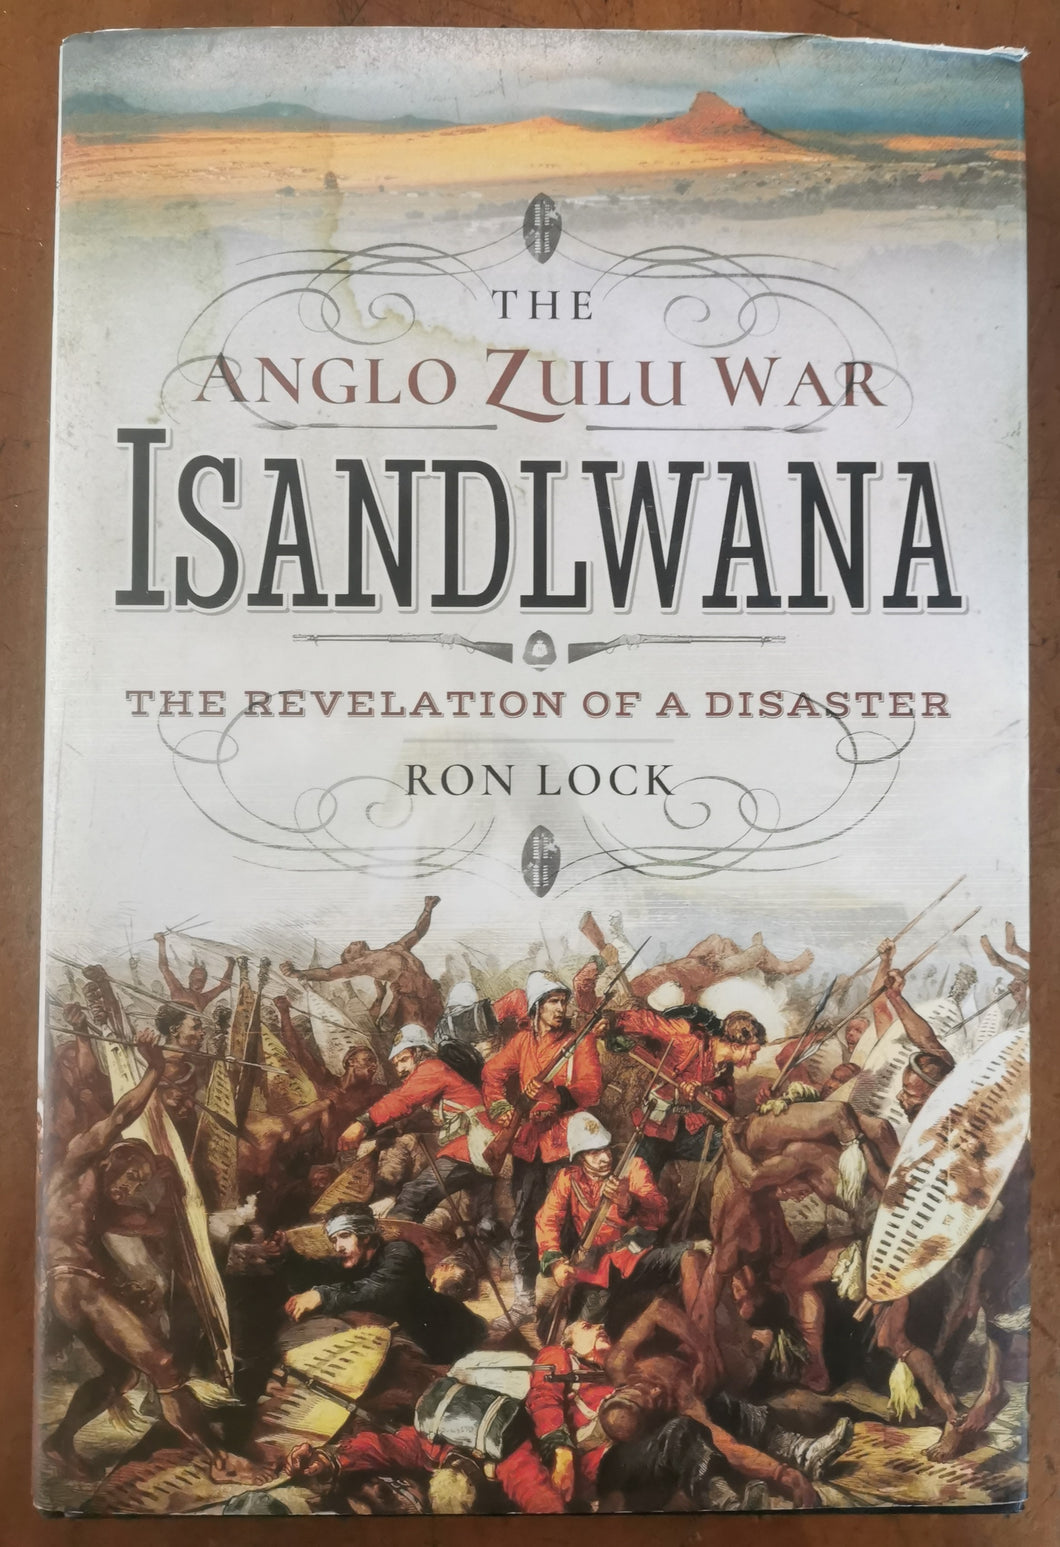 Isandlwana: The Revelation of a Disaster by Ron Lock